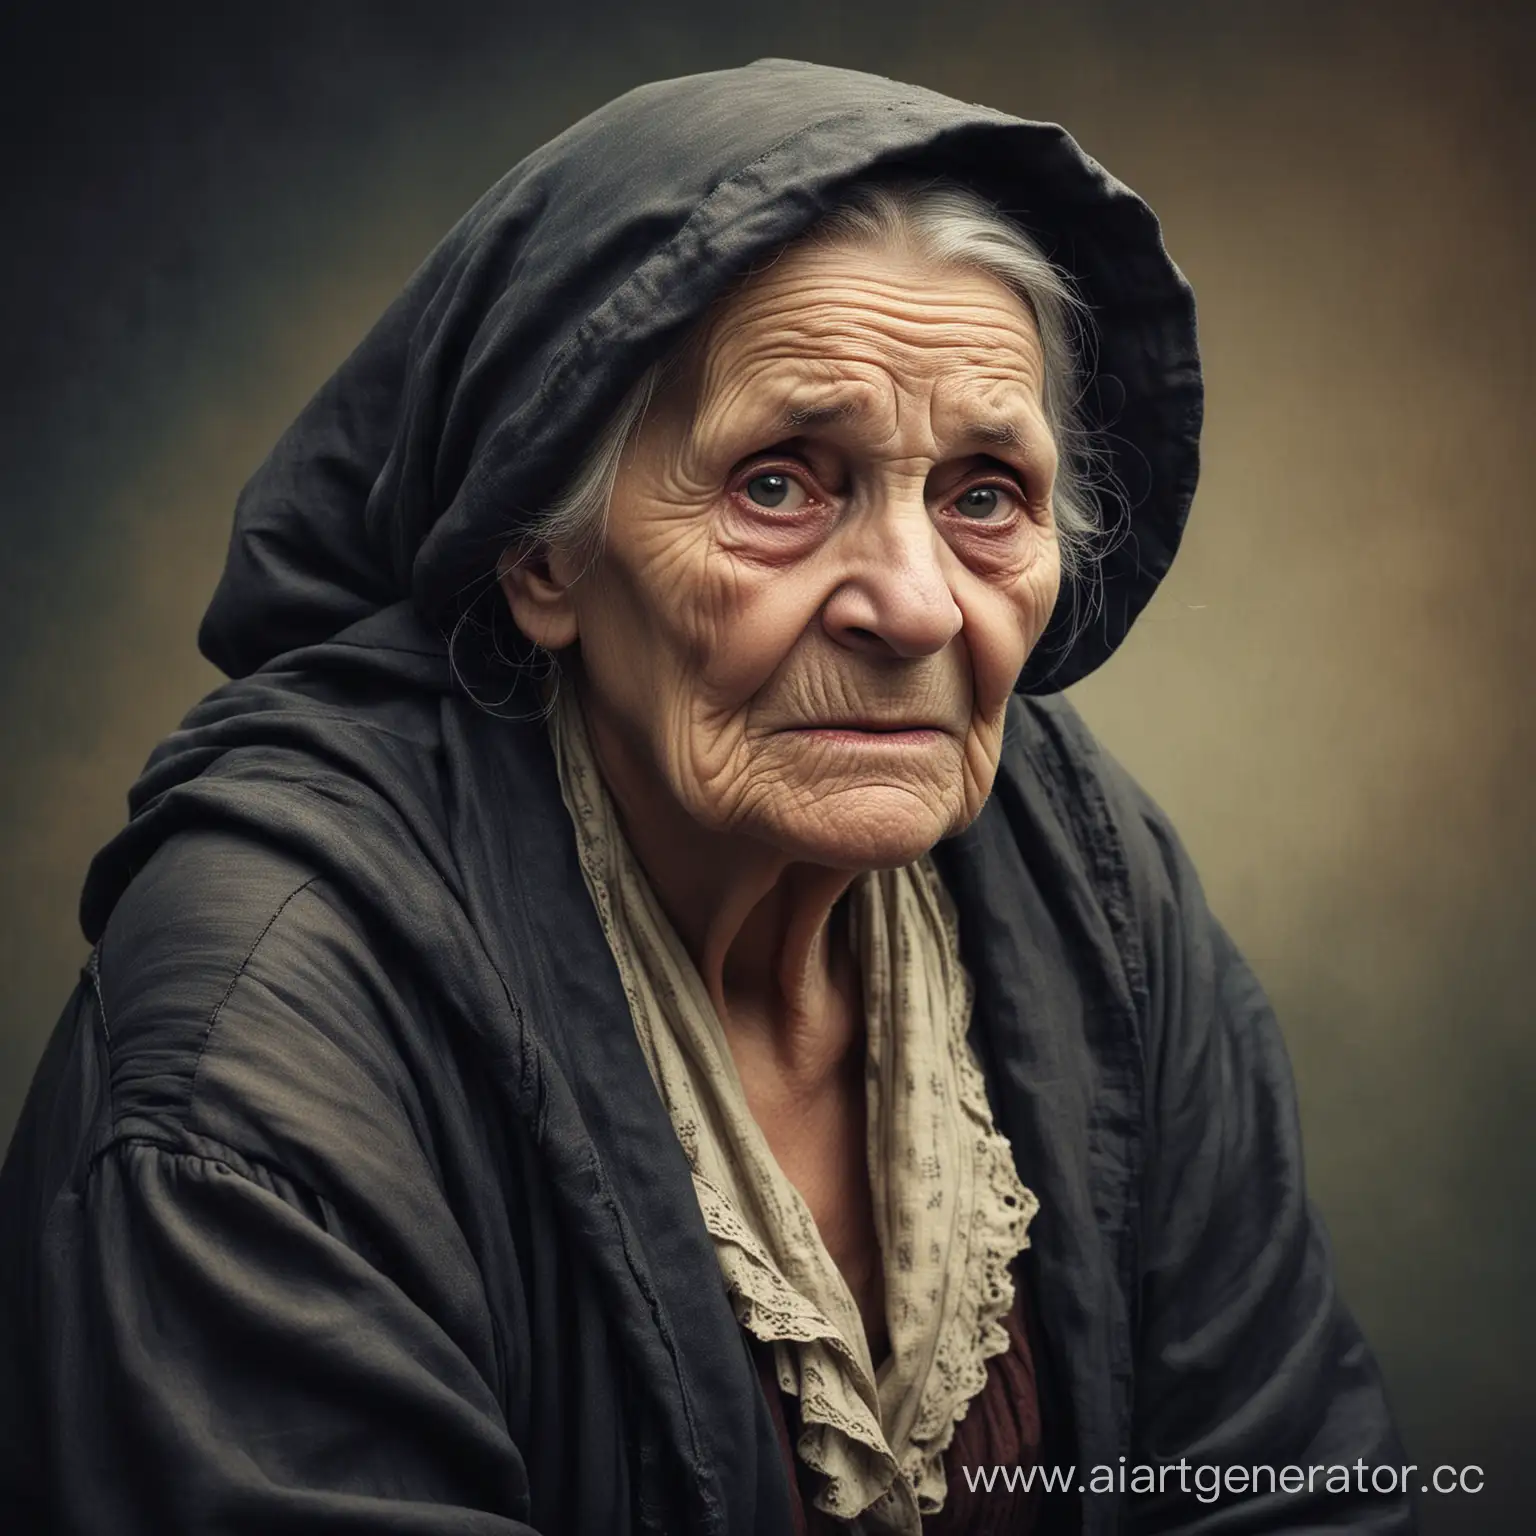 Eerie-Portrait-of-an-Ancient-Hunchbacked-Woman-in-Vintage-Attire